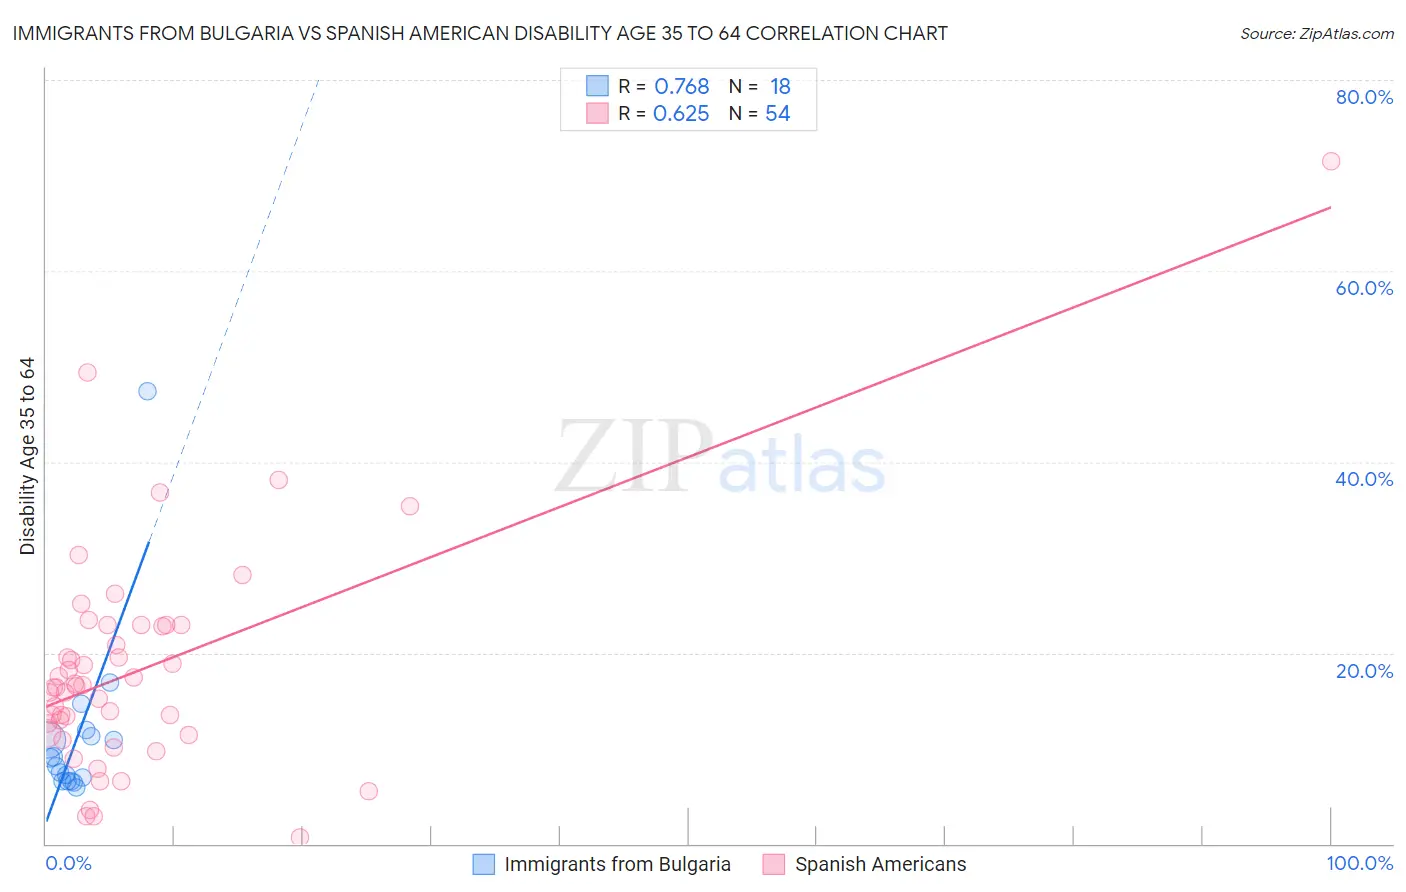 Immigrants from Bulgaria vs Spanish American Disability Age 35 to 64